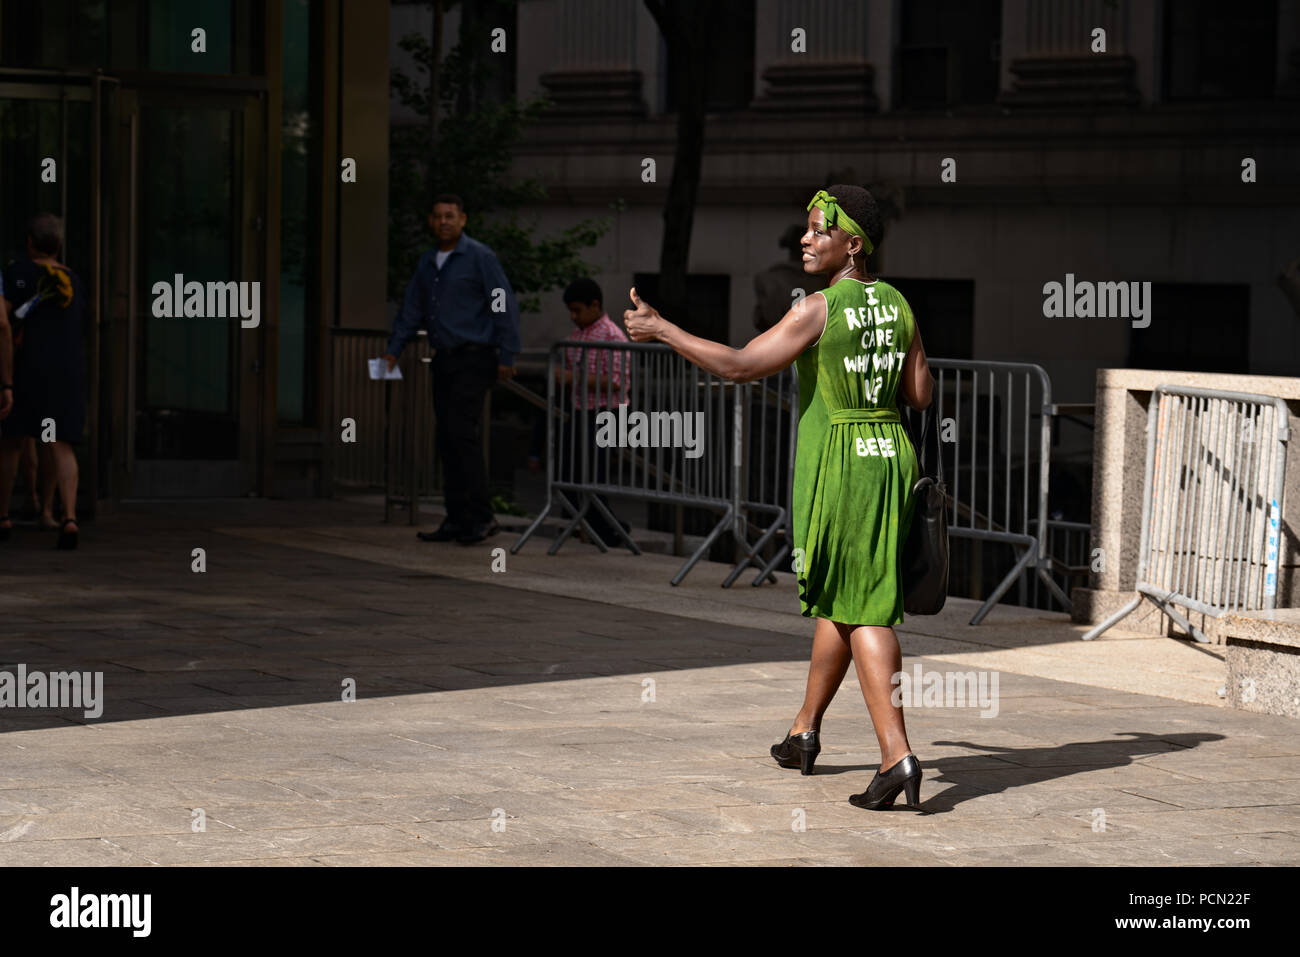 New York, New York, U.S., 3 August 2018 Immigration activist Therese Patricia Okoumou gives a thumbs-up to supporters as she walks into federal court in Manhattan before a hearing on trespassing and disorderly conduct charges.  Okoumou scaled the base of the Statue of Liberty on July 4, 2018, to protest against Trump administration immigration policies.  Okoumou wore a green dress to court bearing the words “I really care why won’t u?” – a response to first lady Melania Trump, who wore a jacket with the words “I really don’t care, do u?” when she visited a facility for migrant children in June Stock Photo